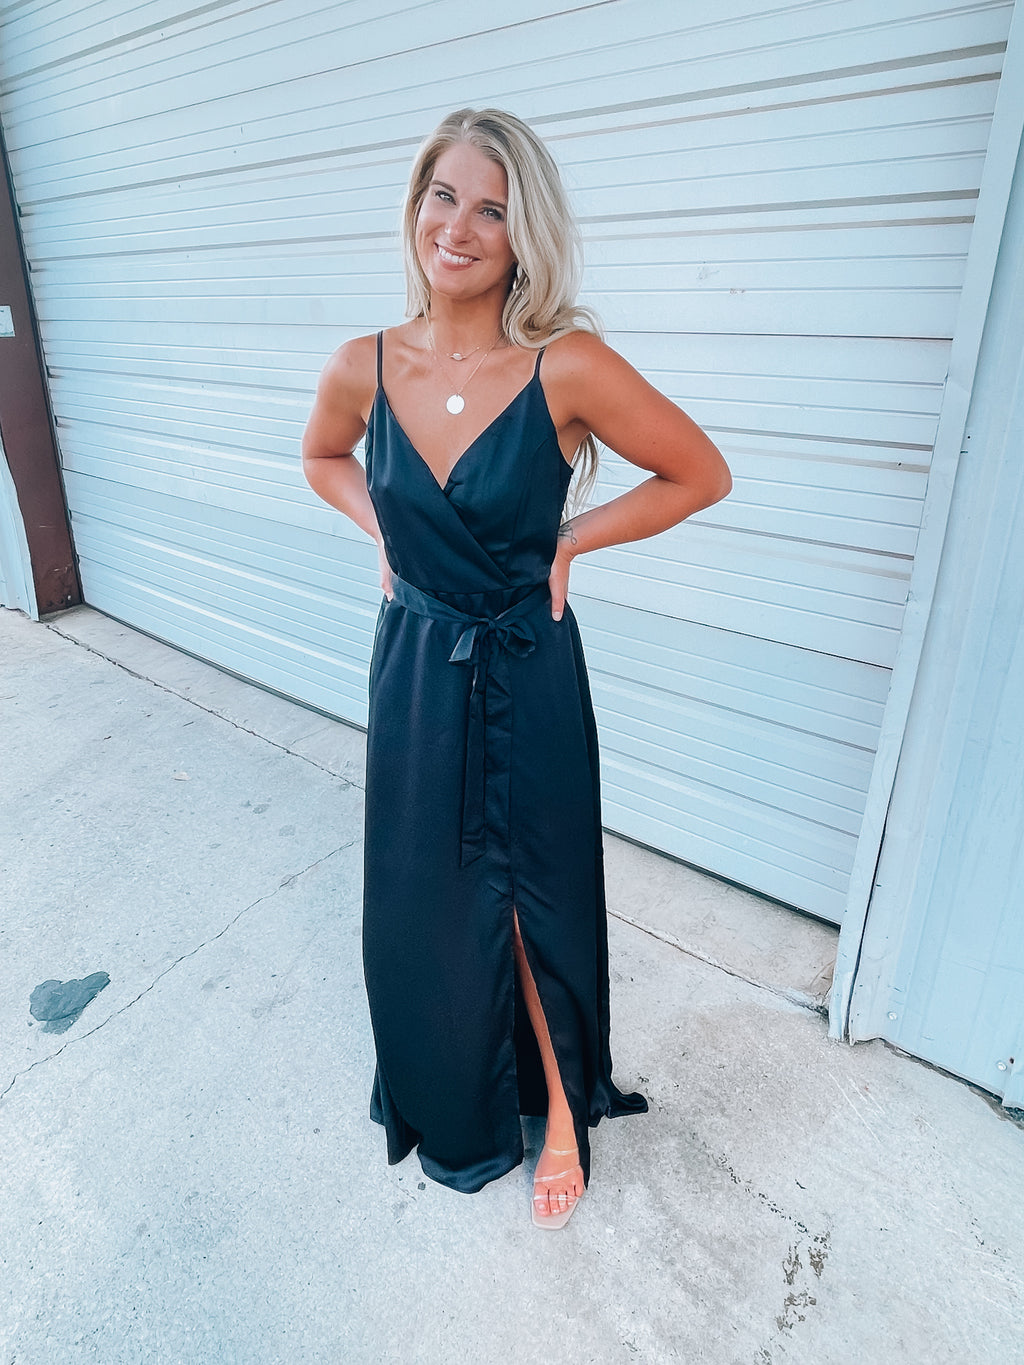 Black satin maxi includes a V-neck wrap design, adjustable straps, and high slit detail, creating the perfect combination of elegant yet oh so sexy! Runs true to size!